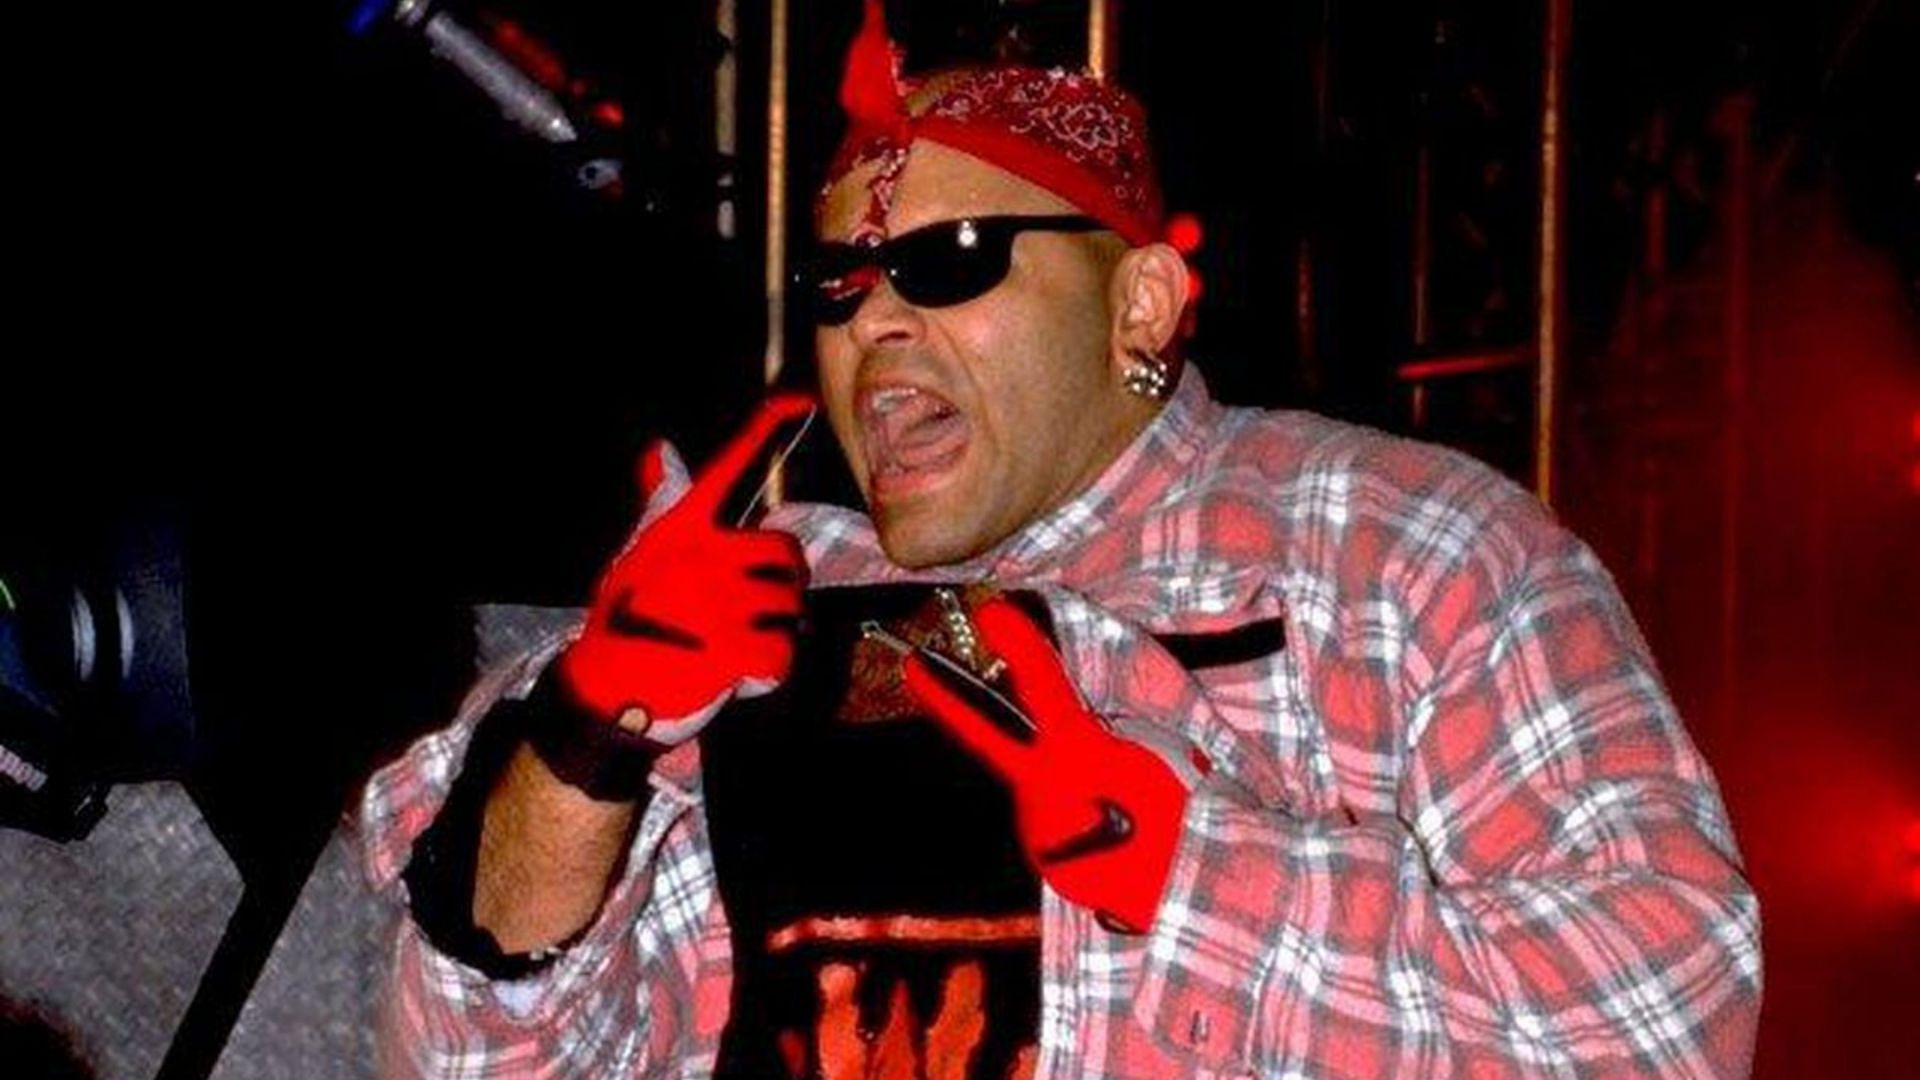 WCW legend Konnan had real-life heat with Curtis Axel